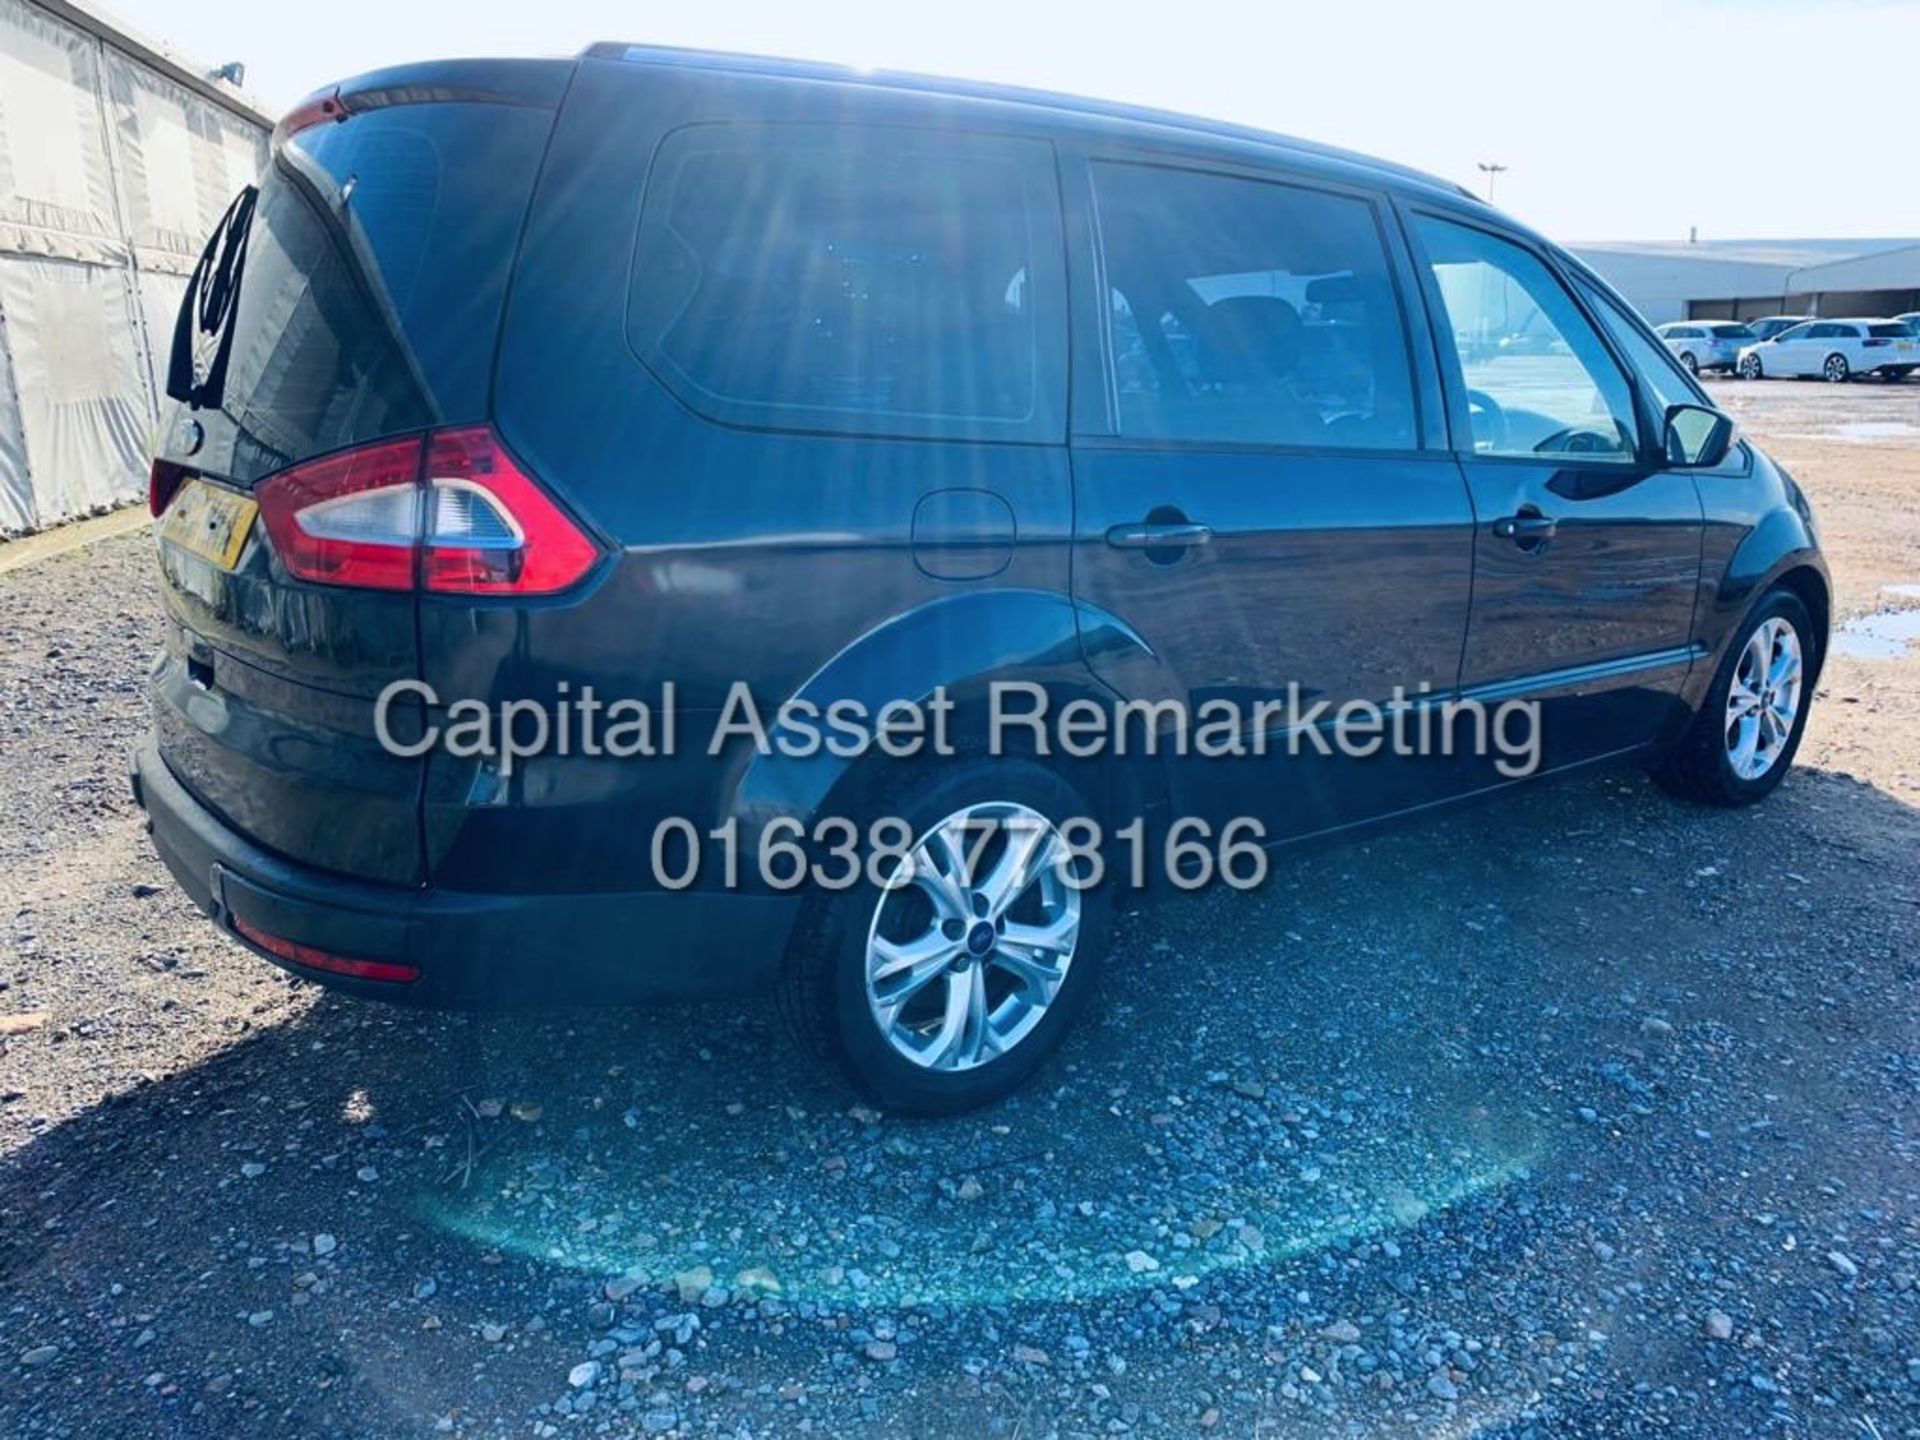 (ON SALE) FORD GALAXY 2.0TDCI AUTOMATIC "ZETEC" 7 SEATER (2013 MODEL) CLIMATE - AIR CON - GREAT SPEC - Image 6 of 19